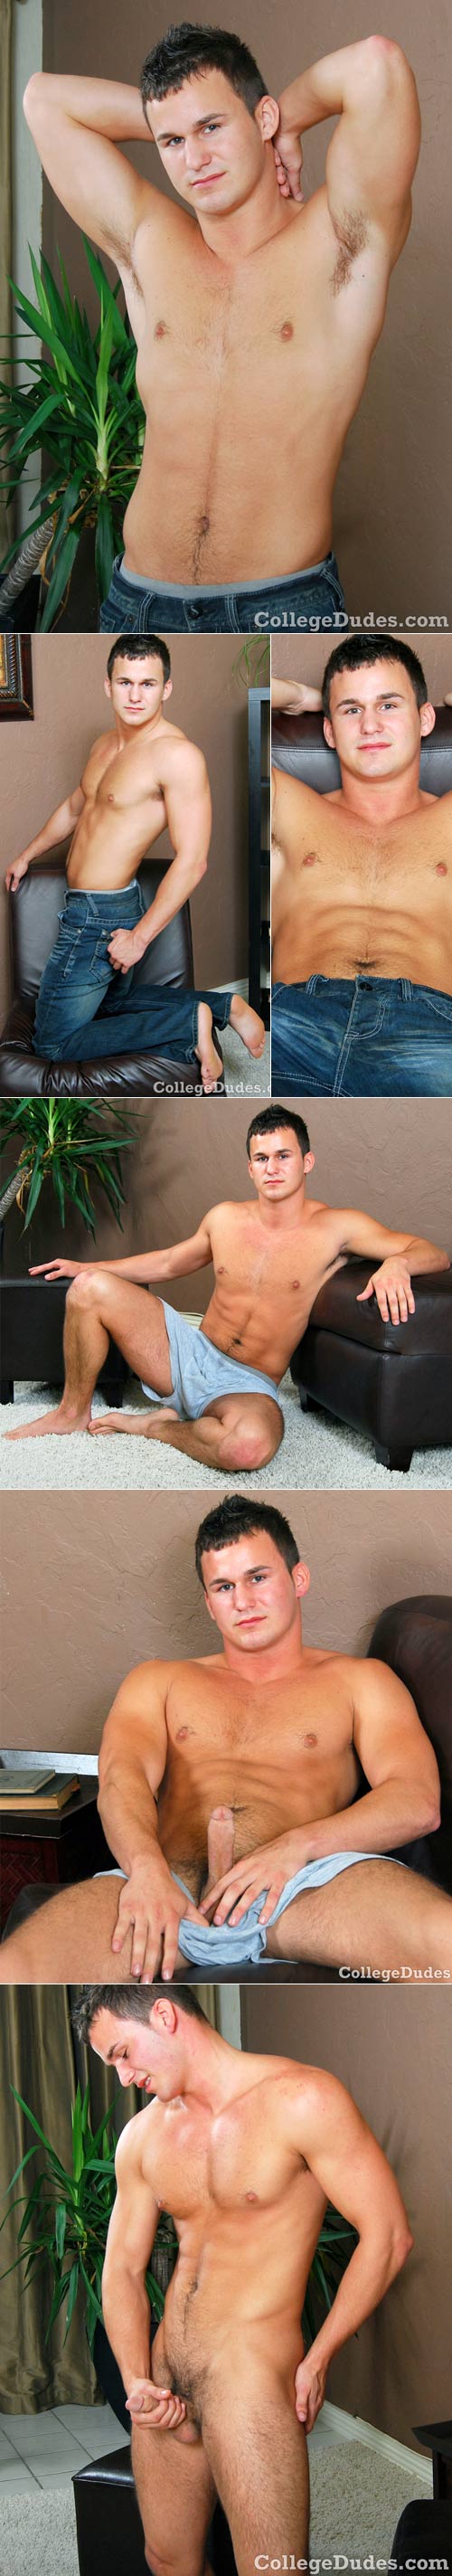 Martin Hess Busts A Nut at CollegeDudes.com